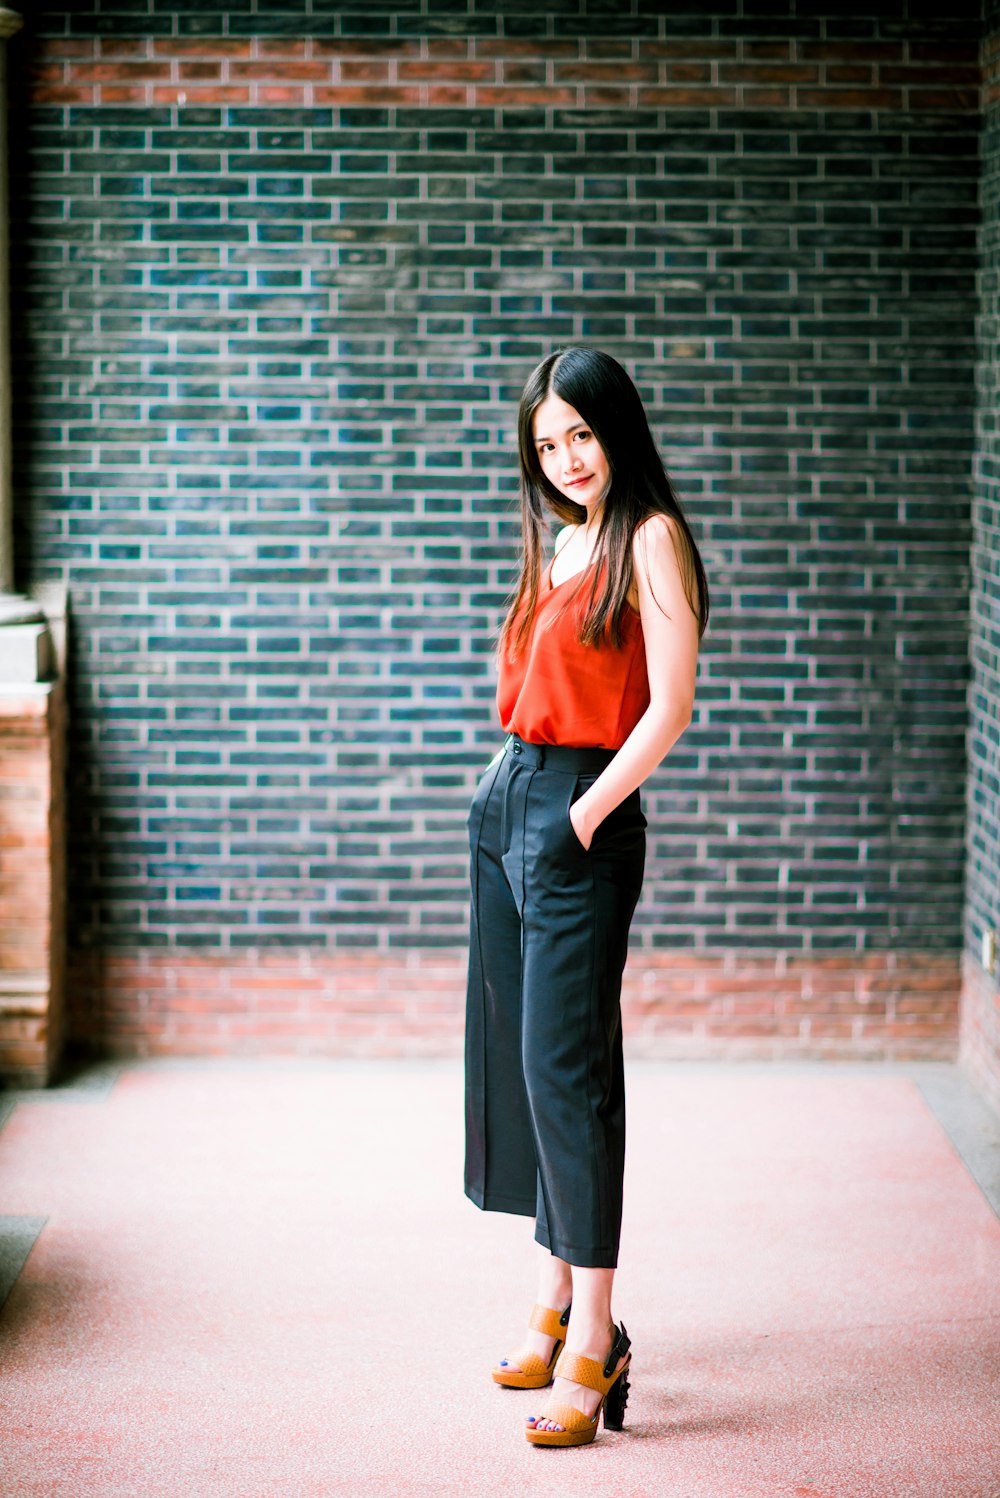 woman in red tank top and black pants standing beside brick wall